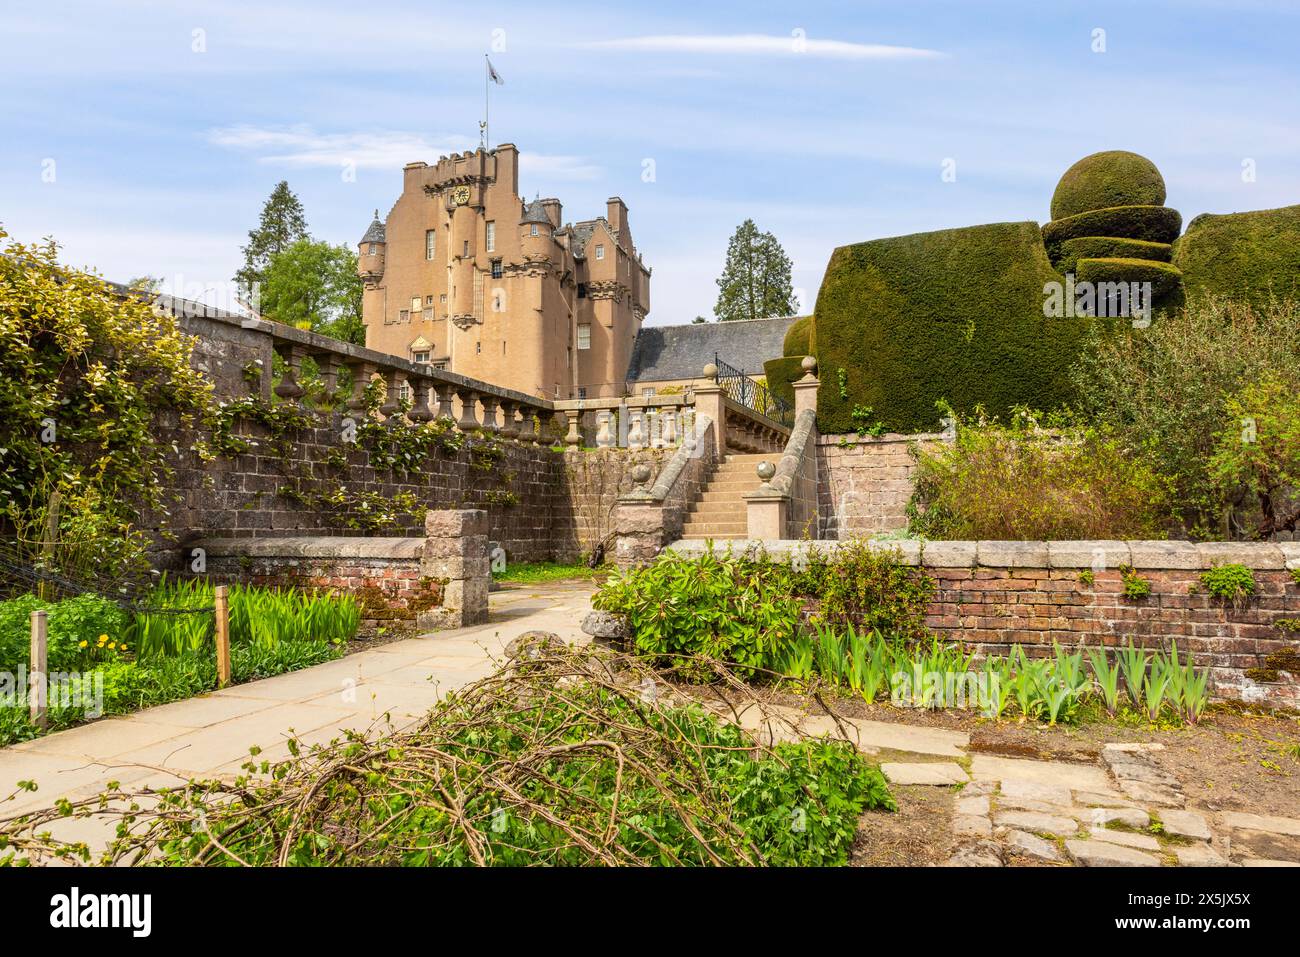 Crathes Castle, a classic Scottish tower house in Aberdeenshire, Scotland, boasts charming turrets and beautiful gardens. Stock Photo